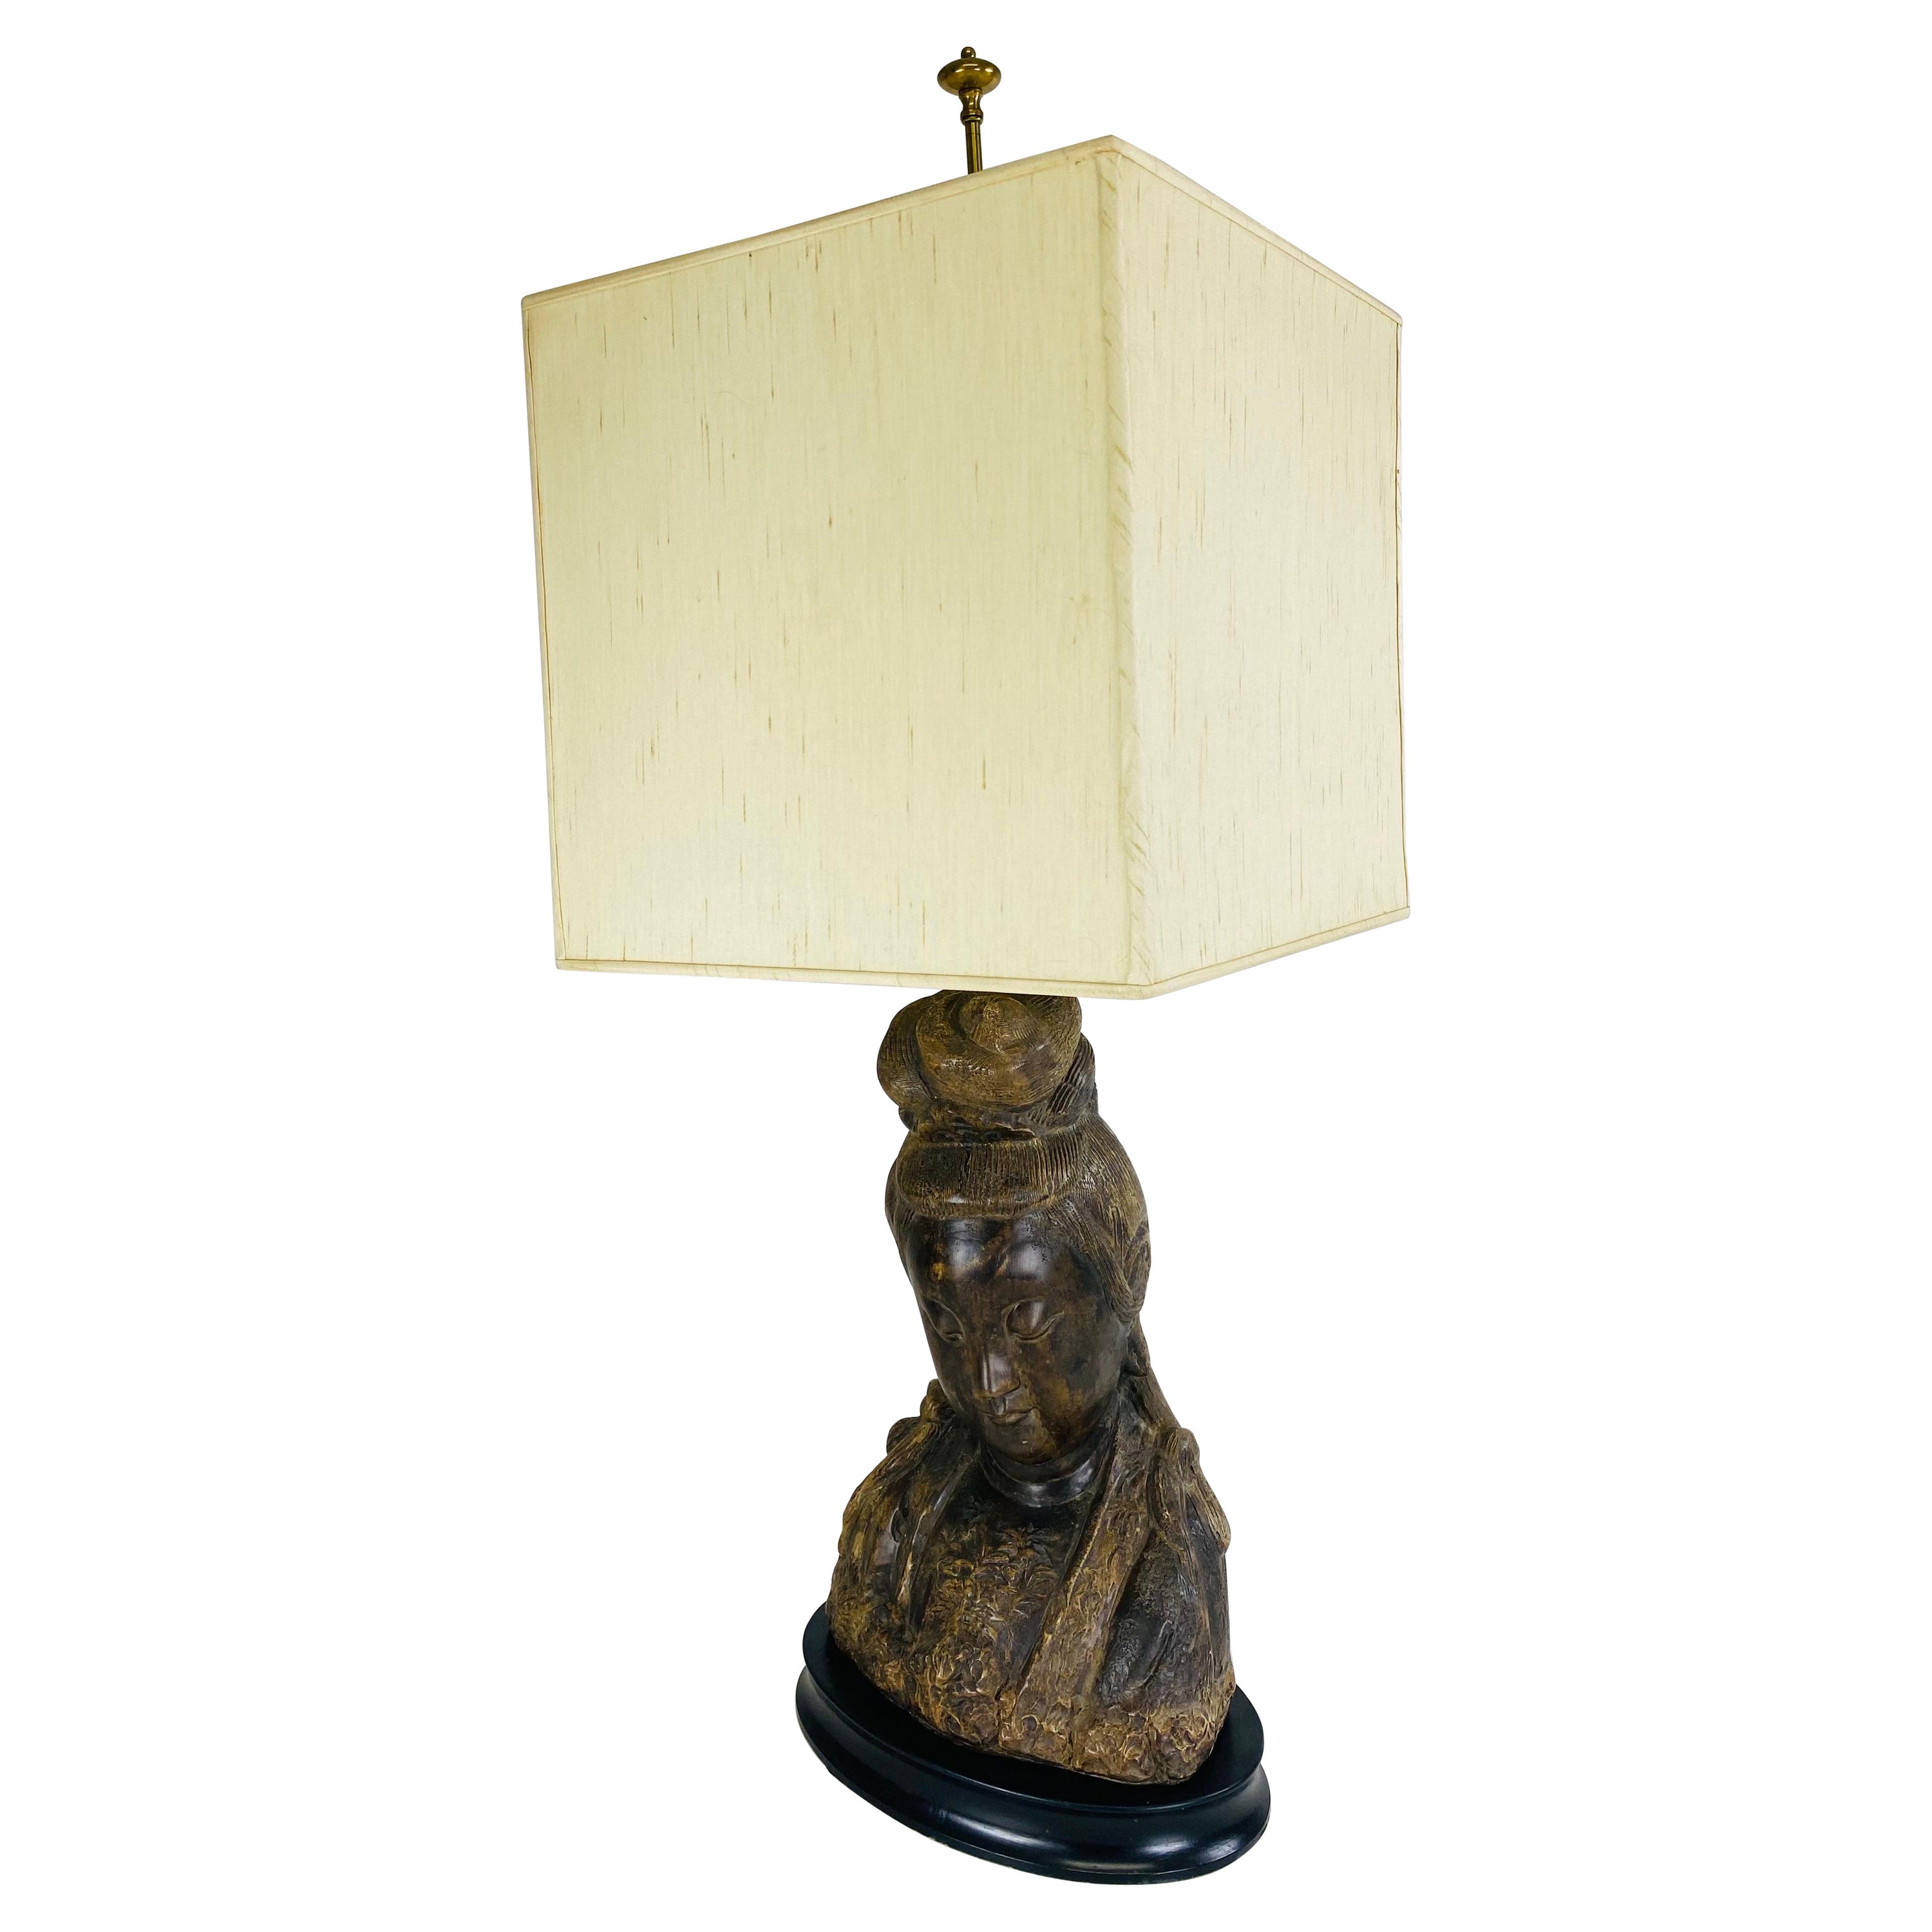 Mid century oversized Asian style table lamp after James Mont. For Sale